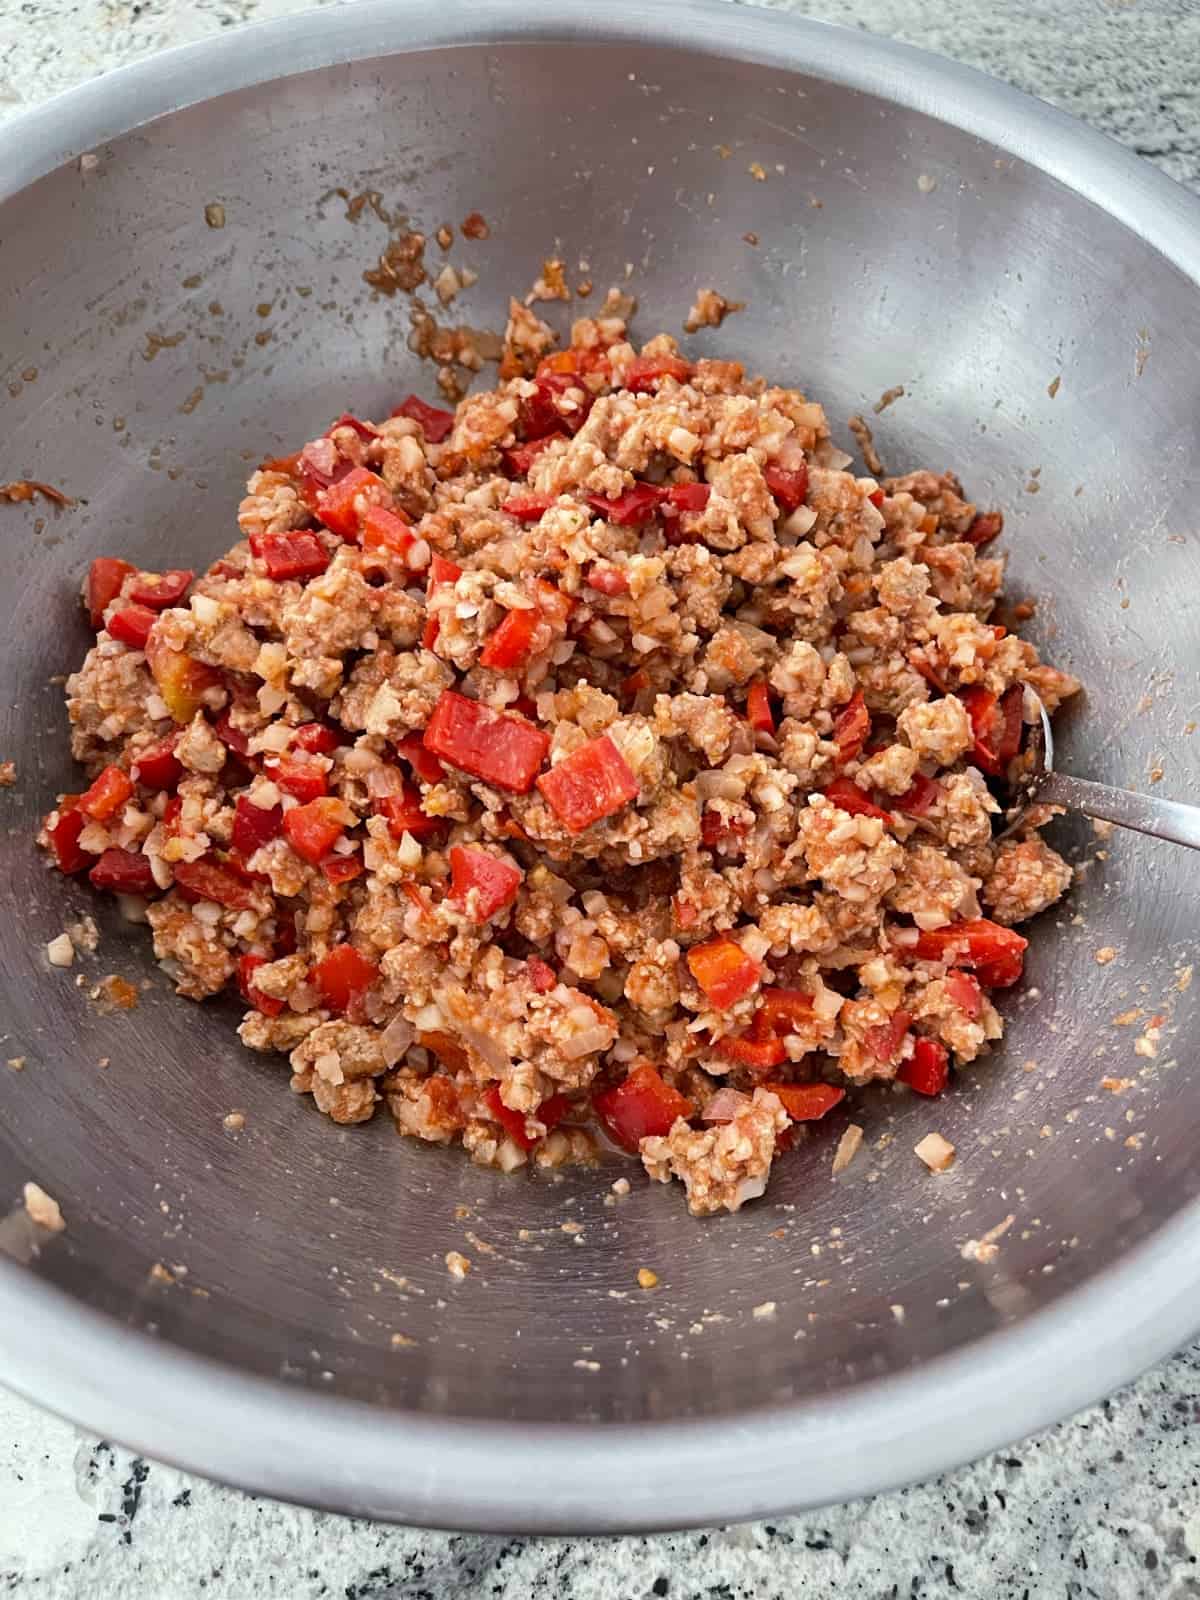 Mixing unstuffed pepper casserole ingredients - cooked ground turkey, chopped bell peppers, riced cauliflower and spices in mixing bowl with spoon.